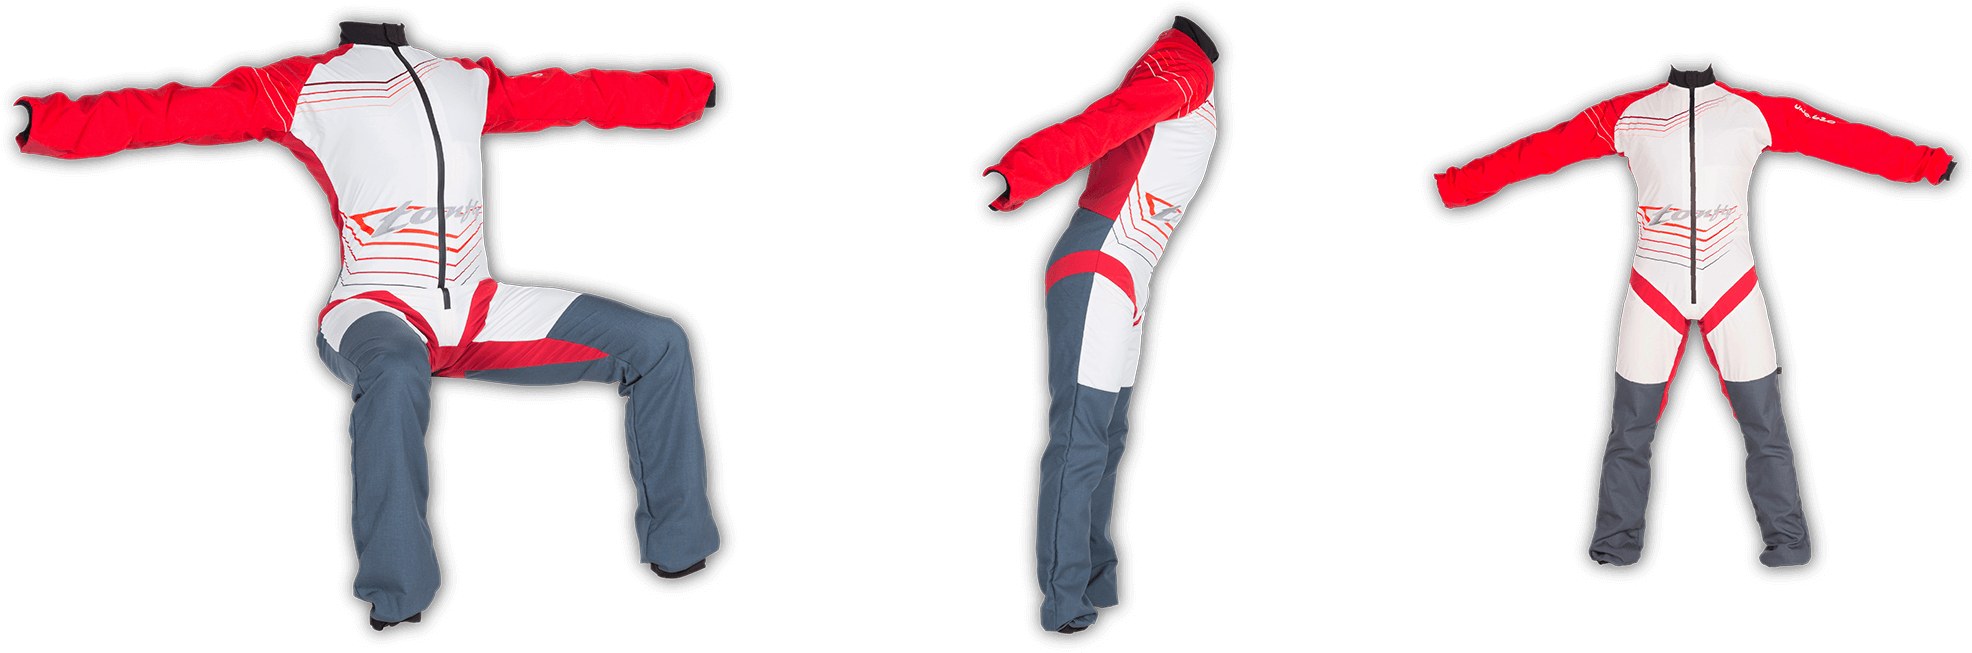 Redand White Racing Suit Triptych PNG